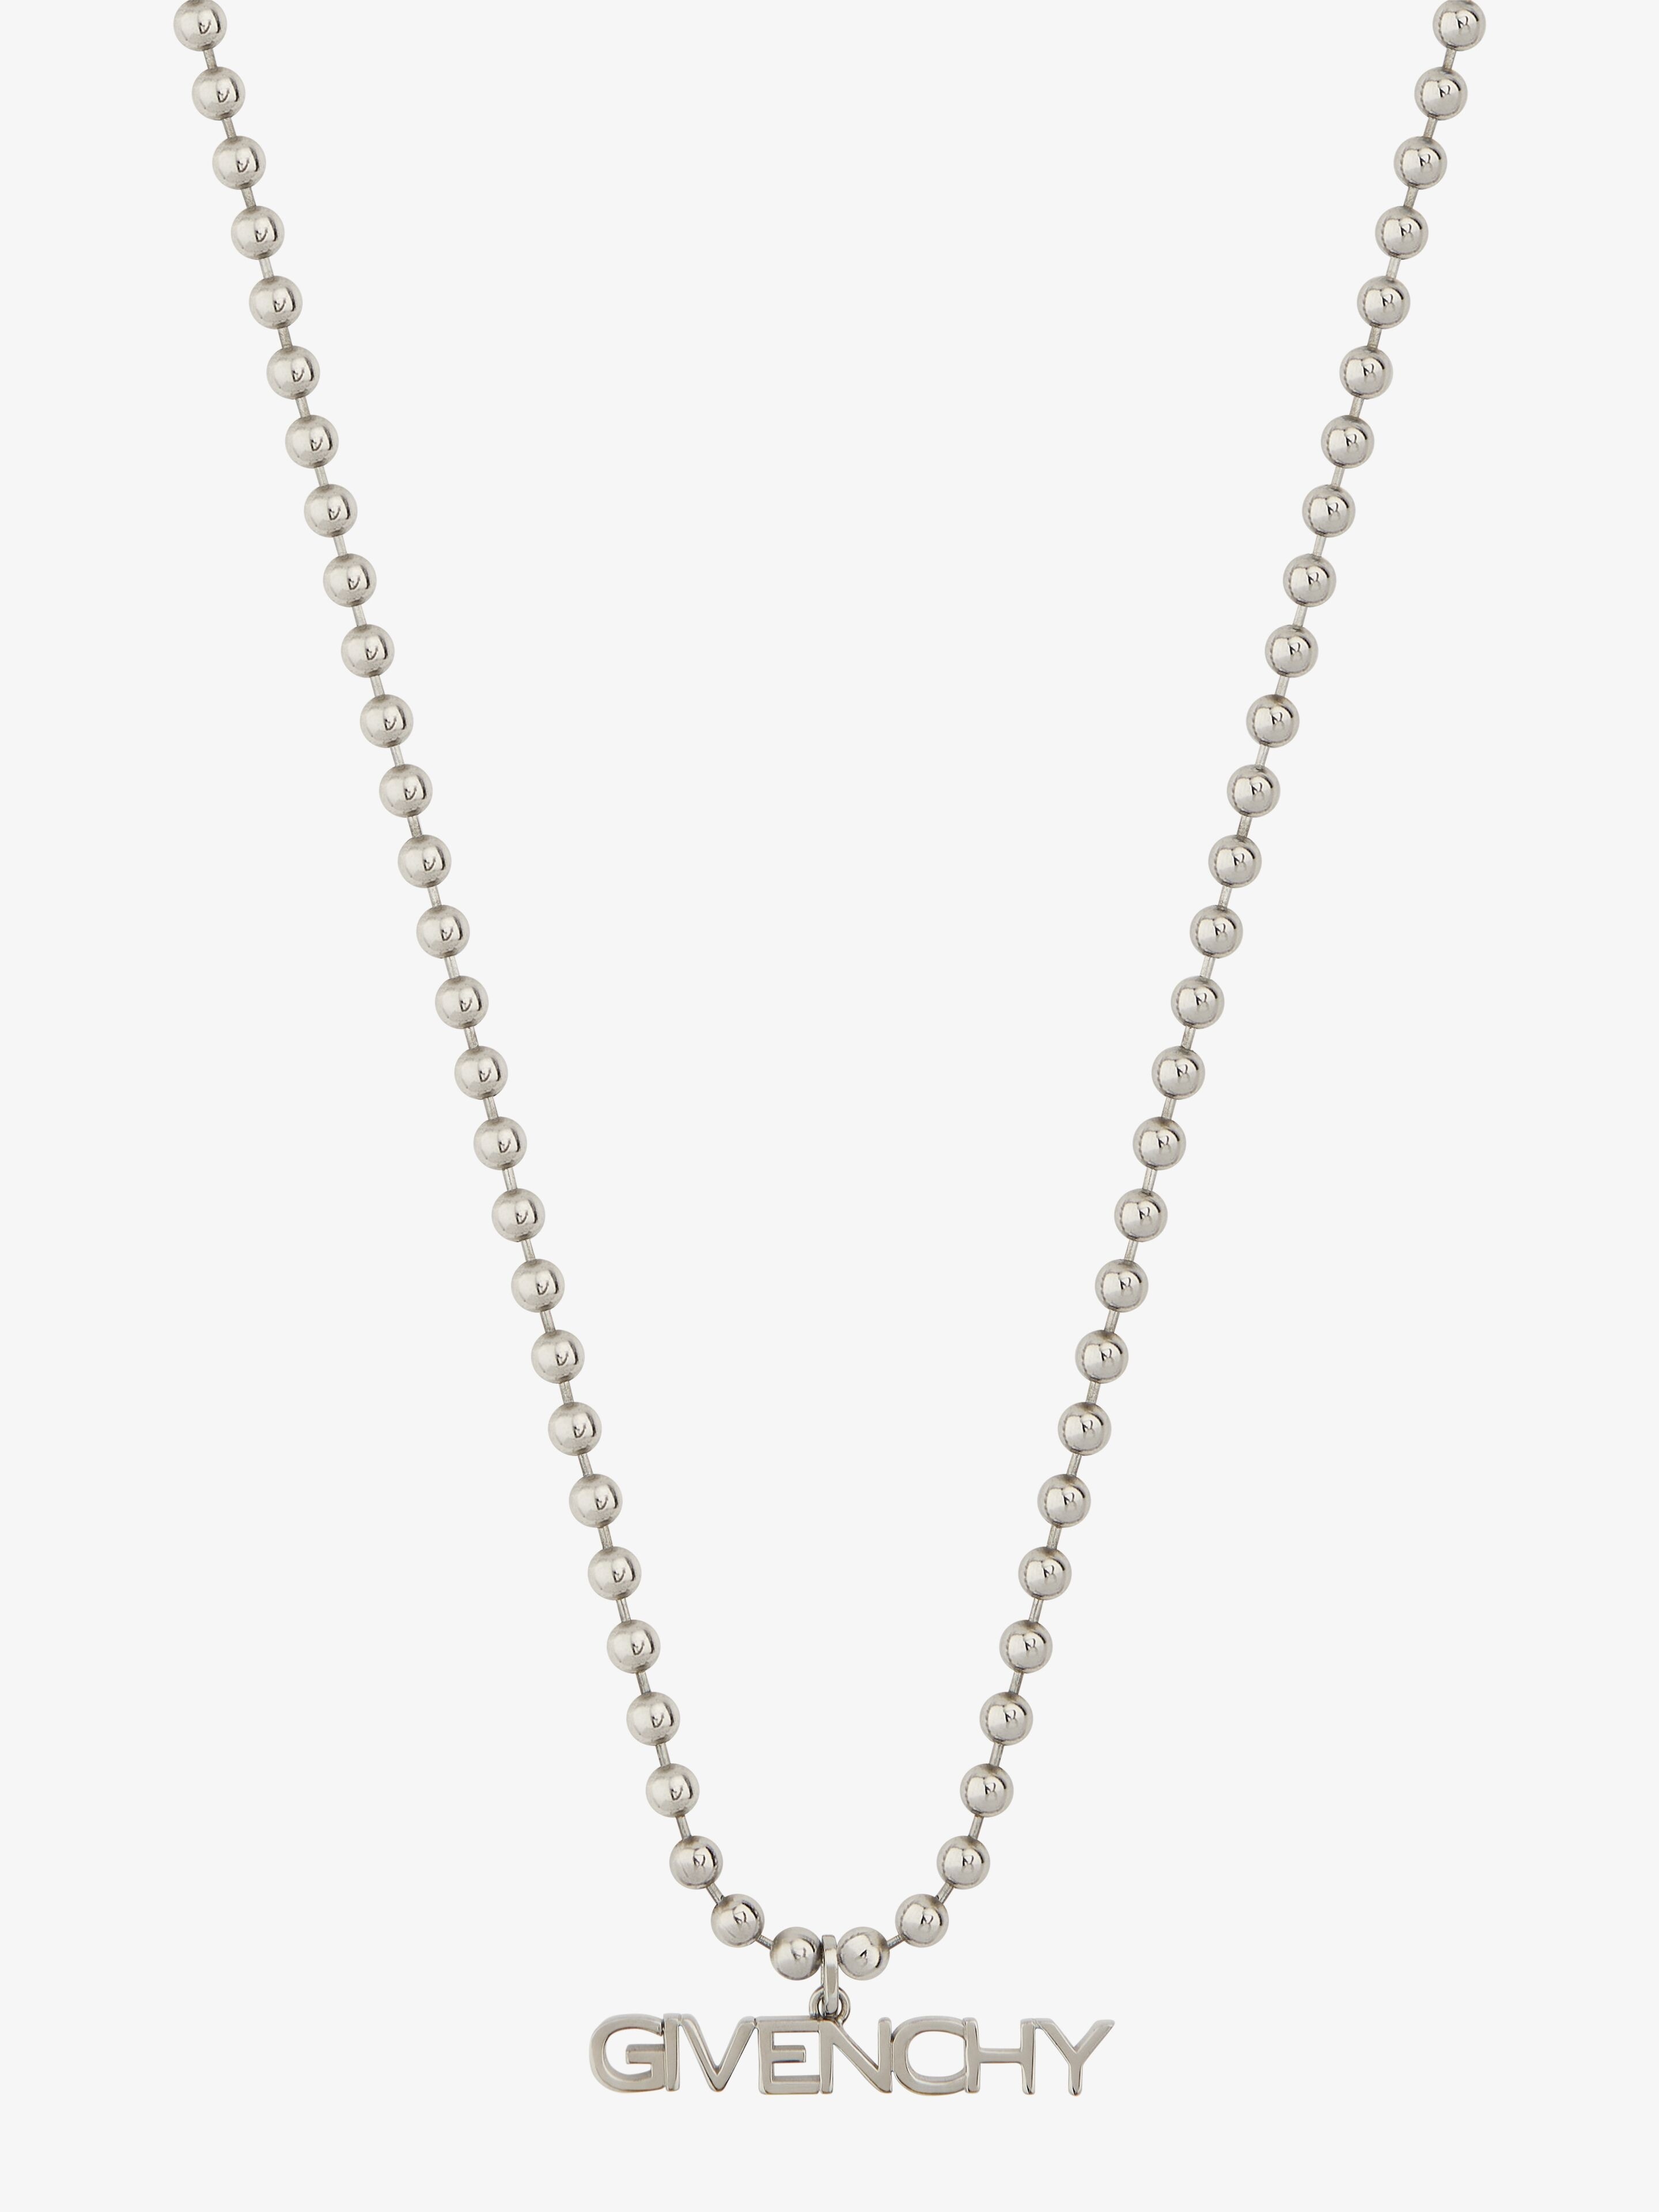 GIVENCHY NECKLACE IN METAL - 2